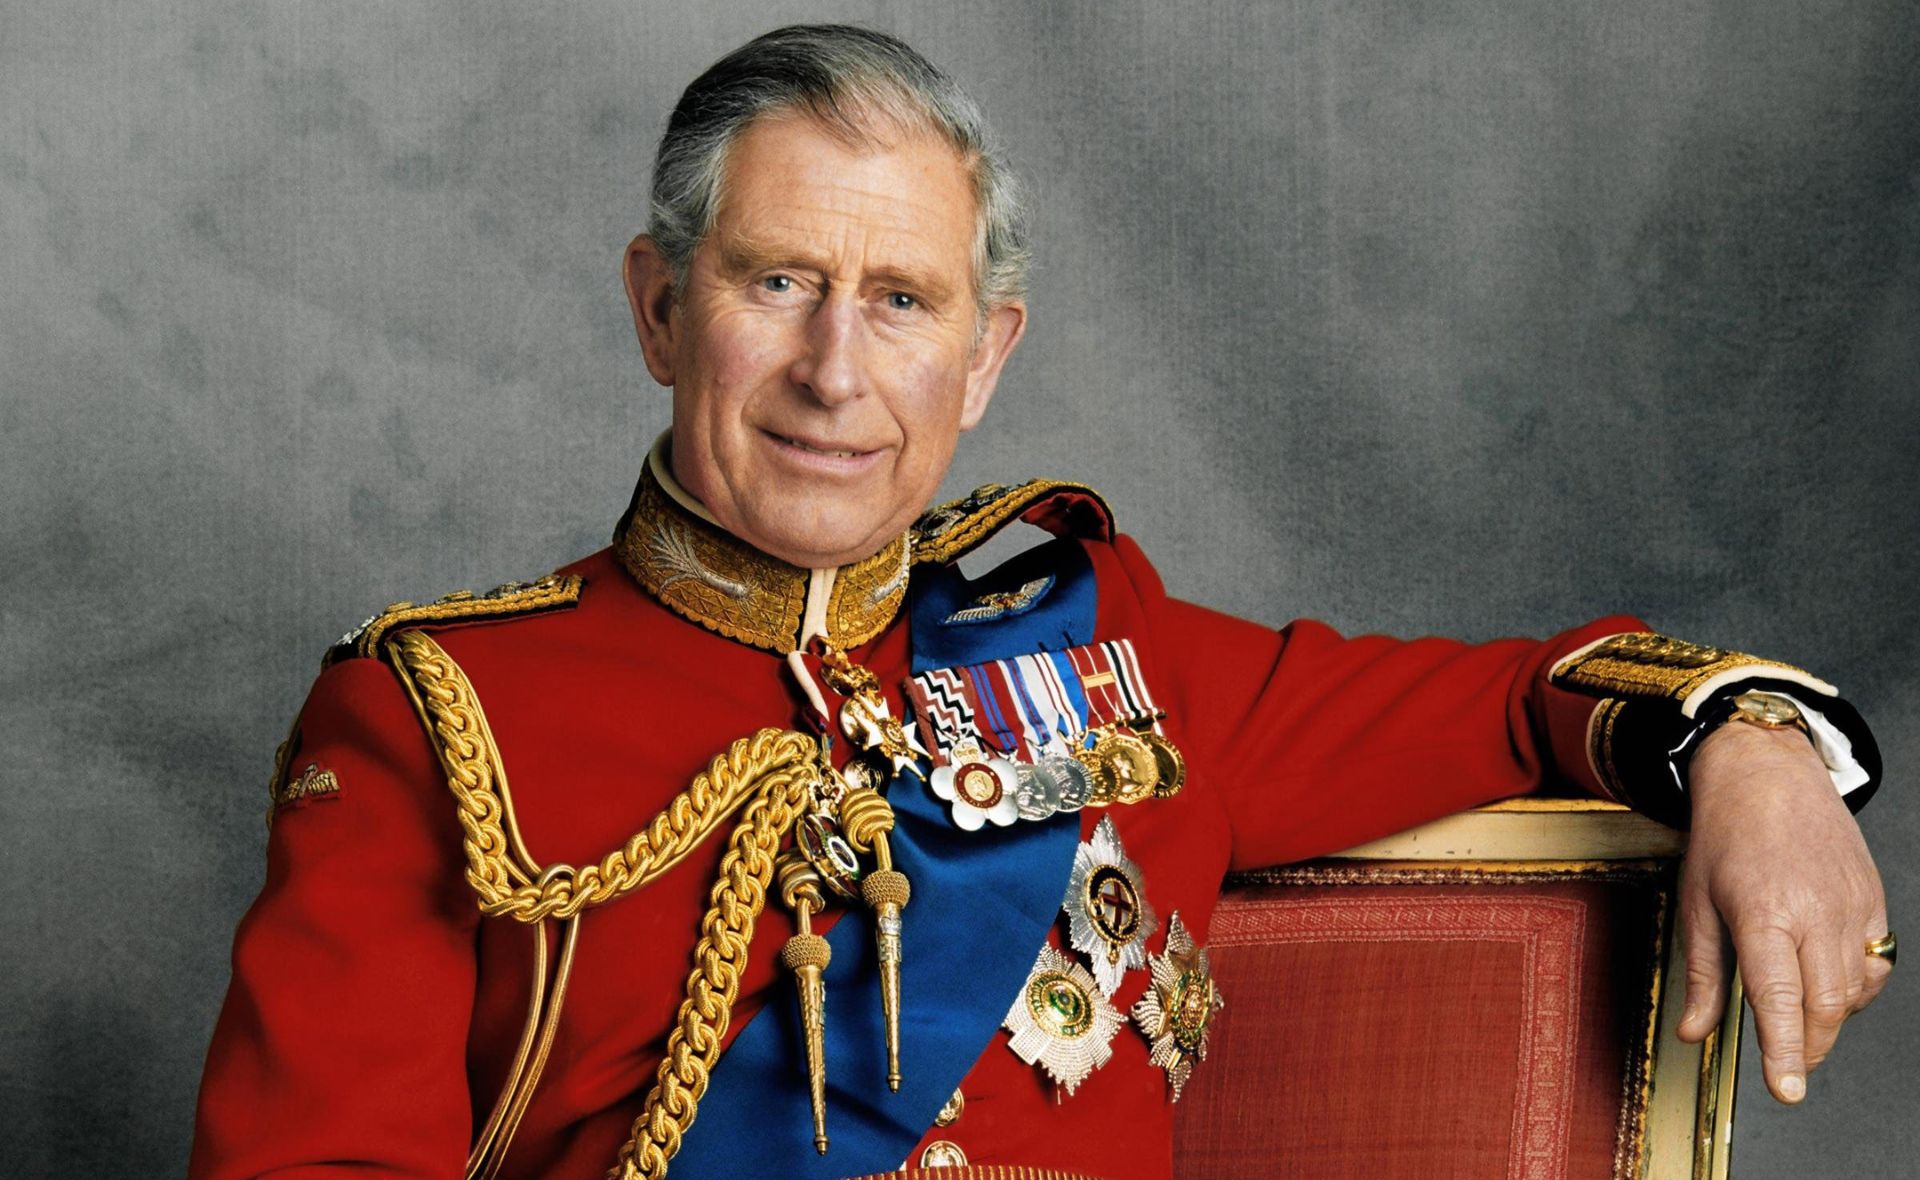 King Charles III reveals his new cypher to mark his new reign